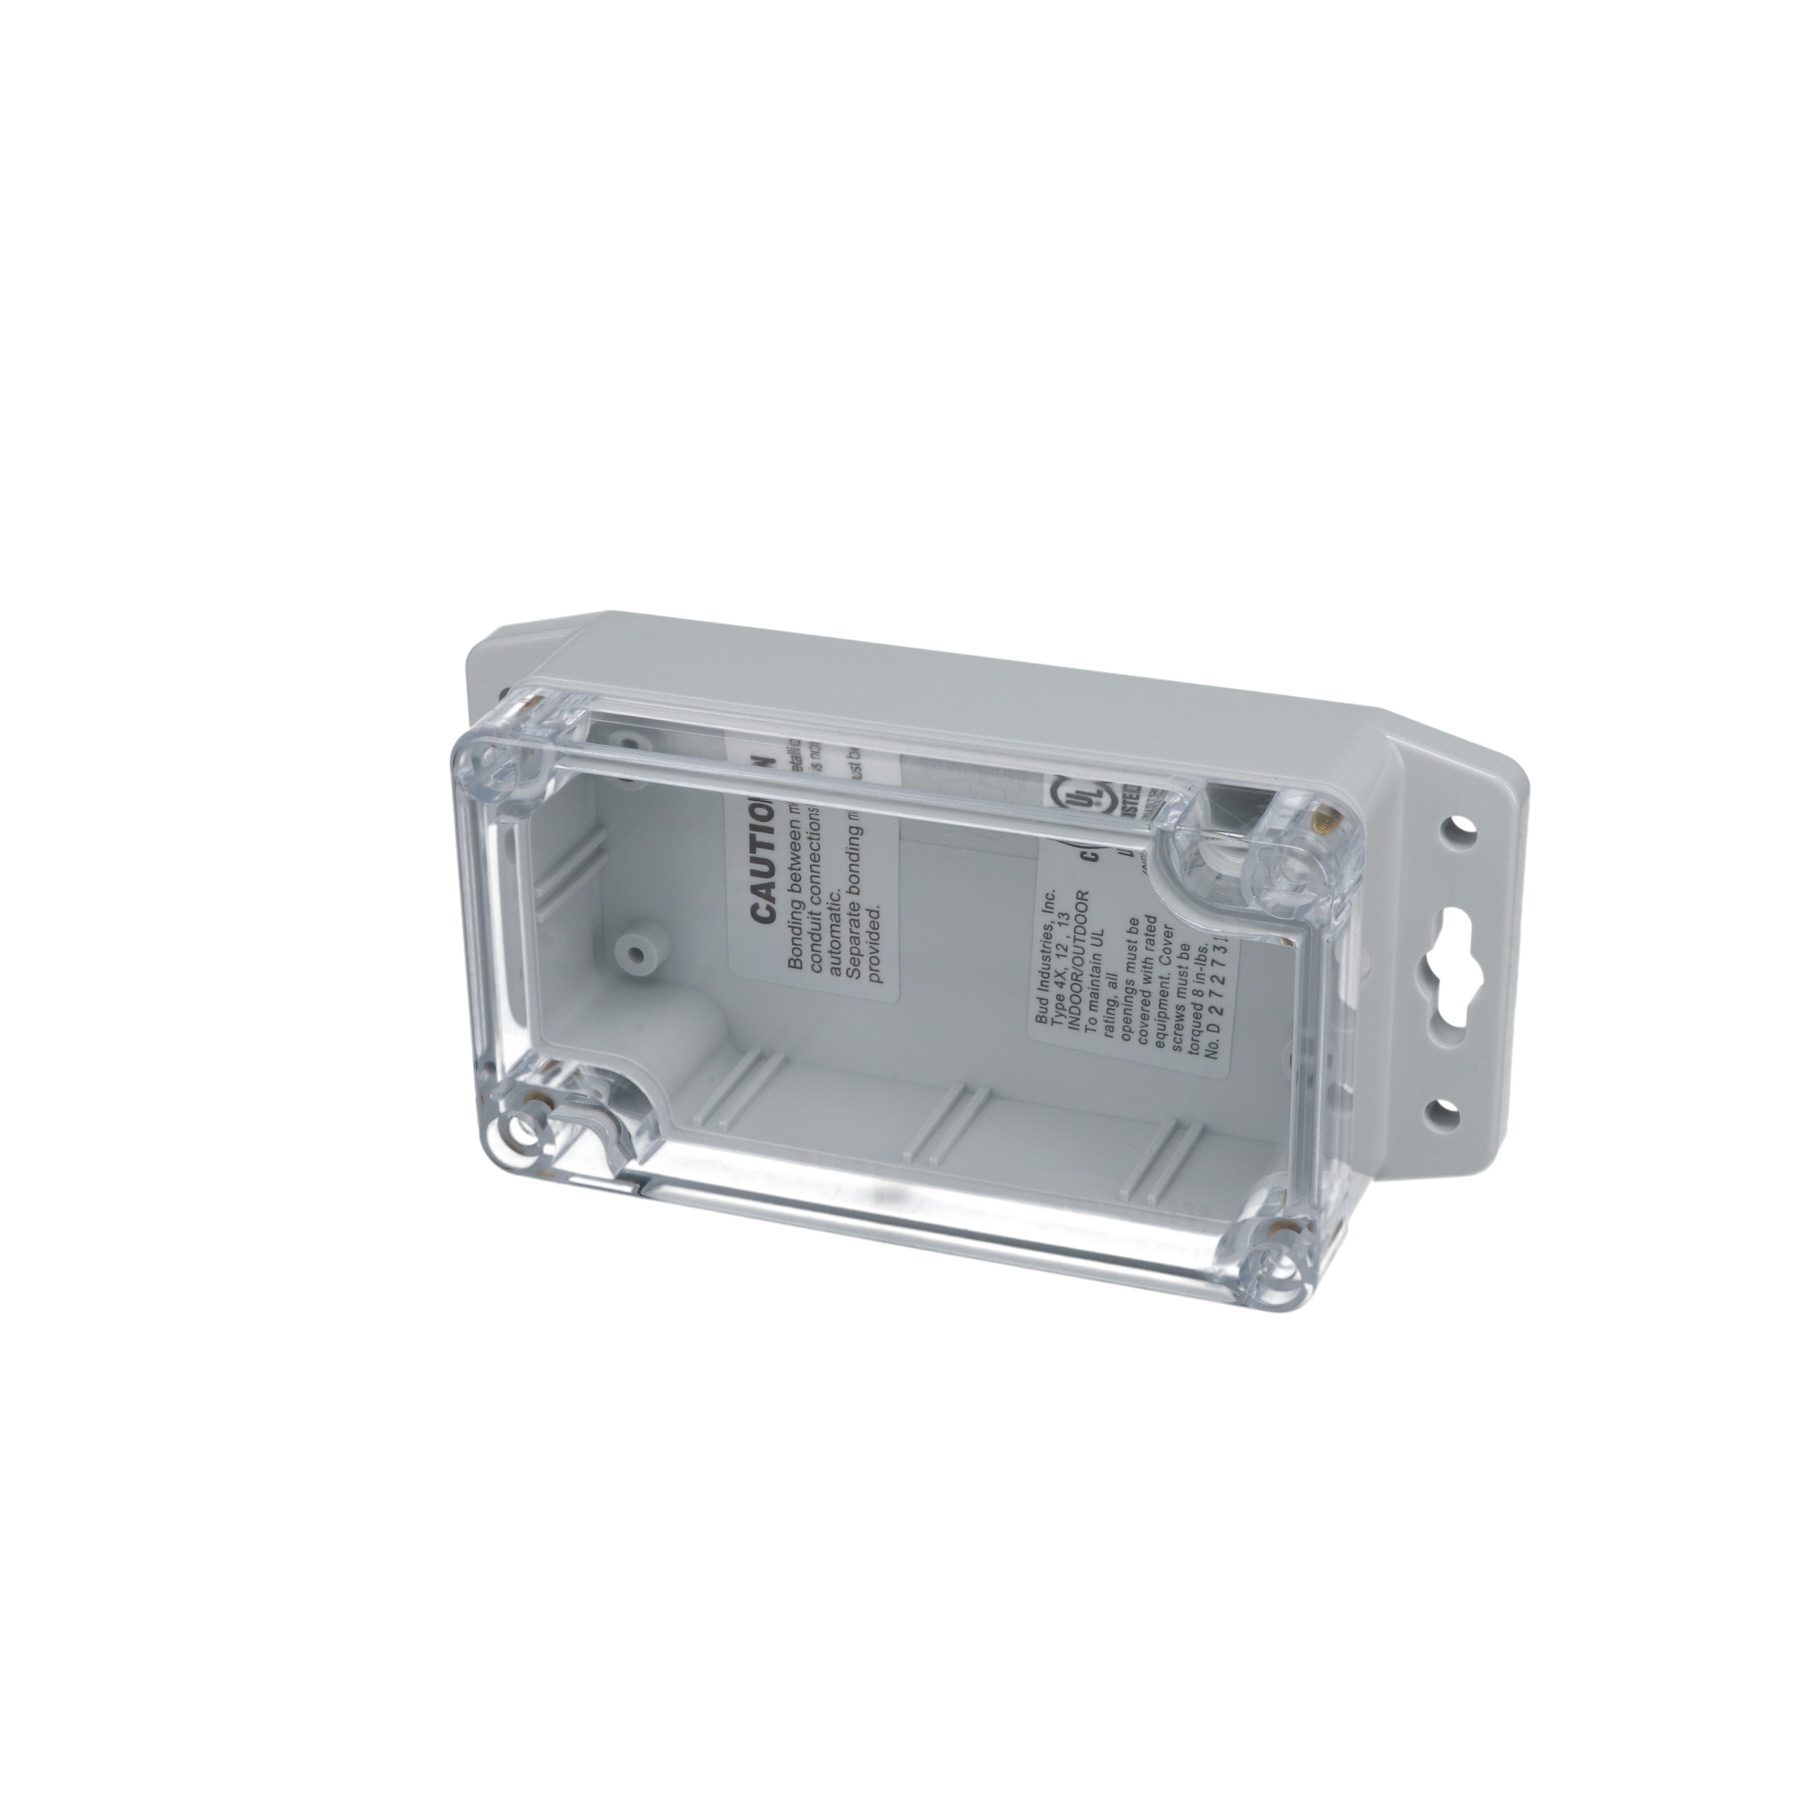 IP65 NEMA 4X Box with Clear Cover and Mounting Brackets PN-1321-CMB